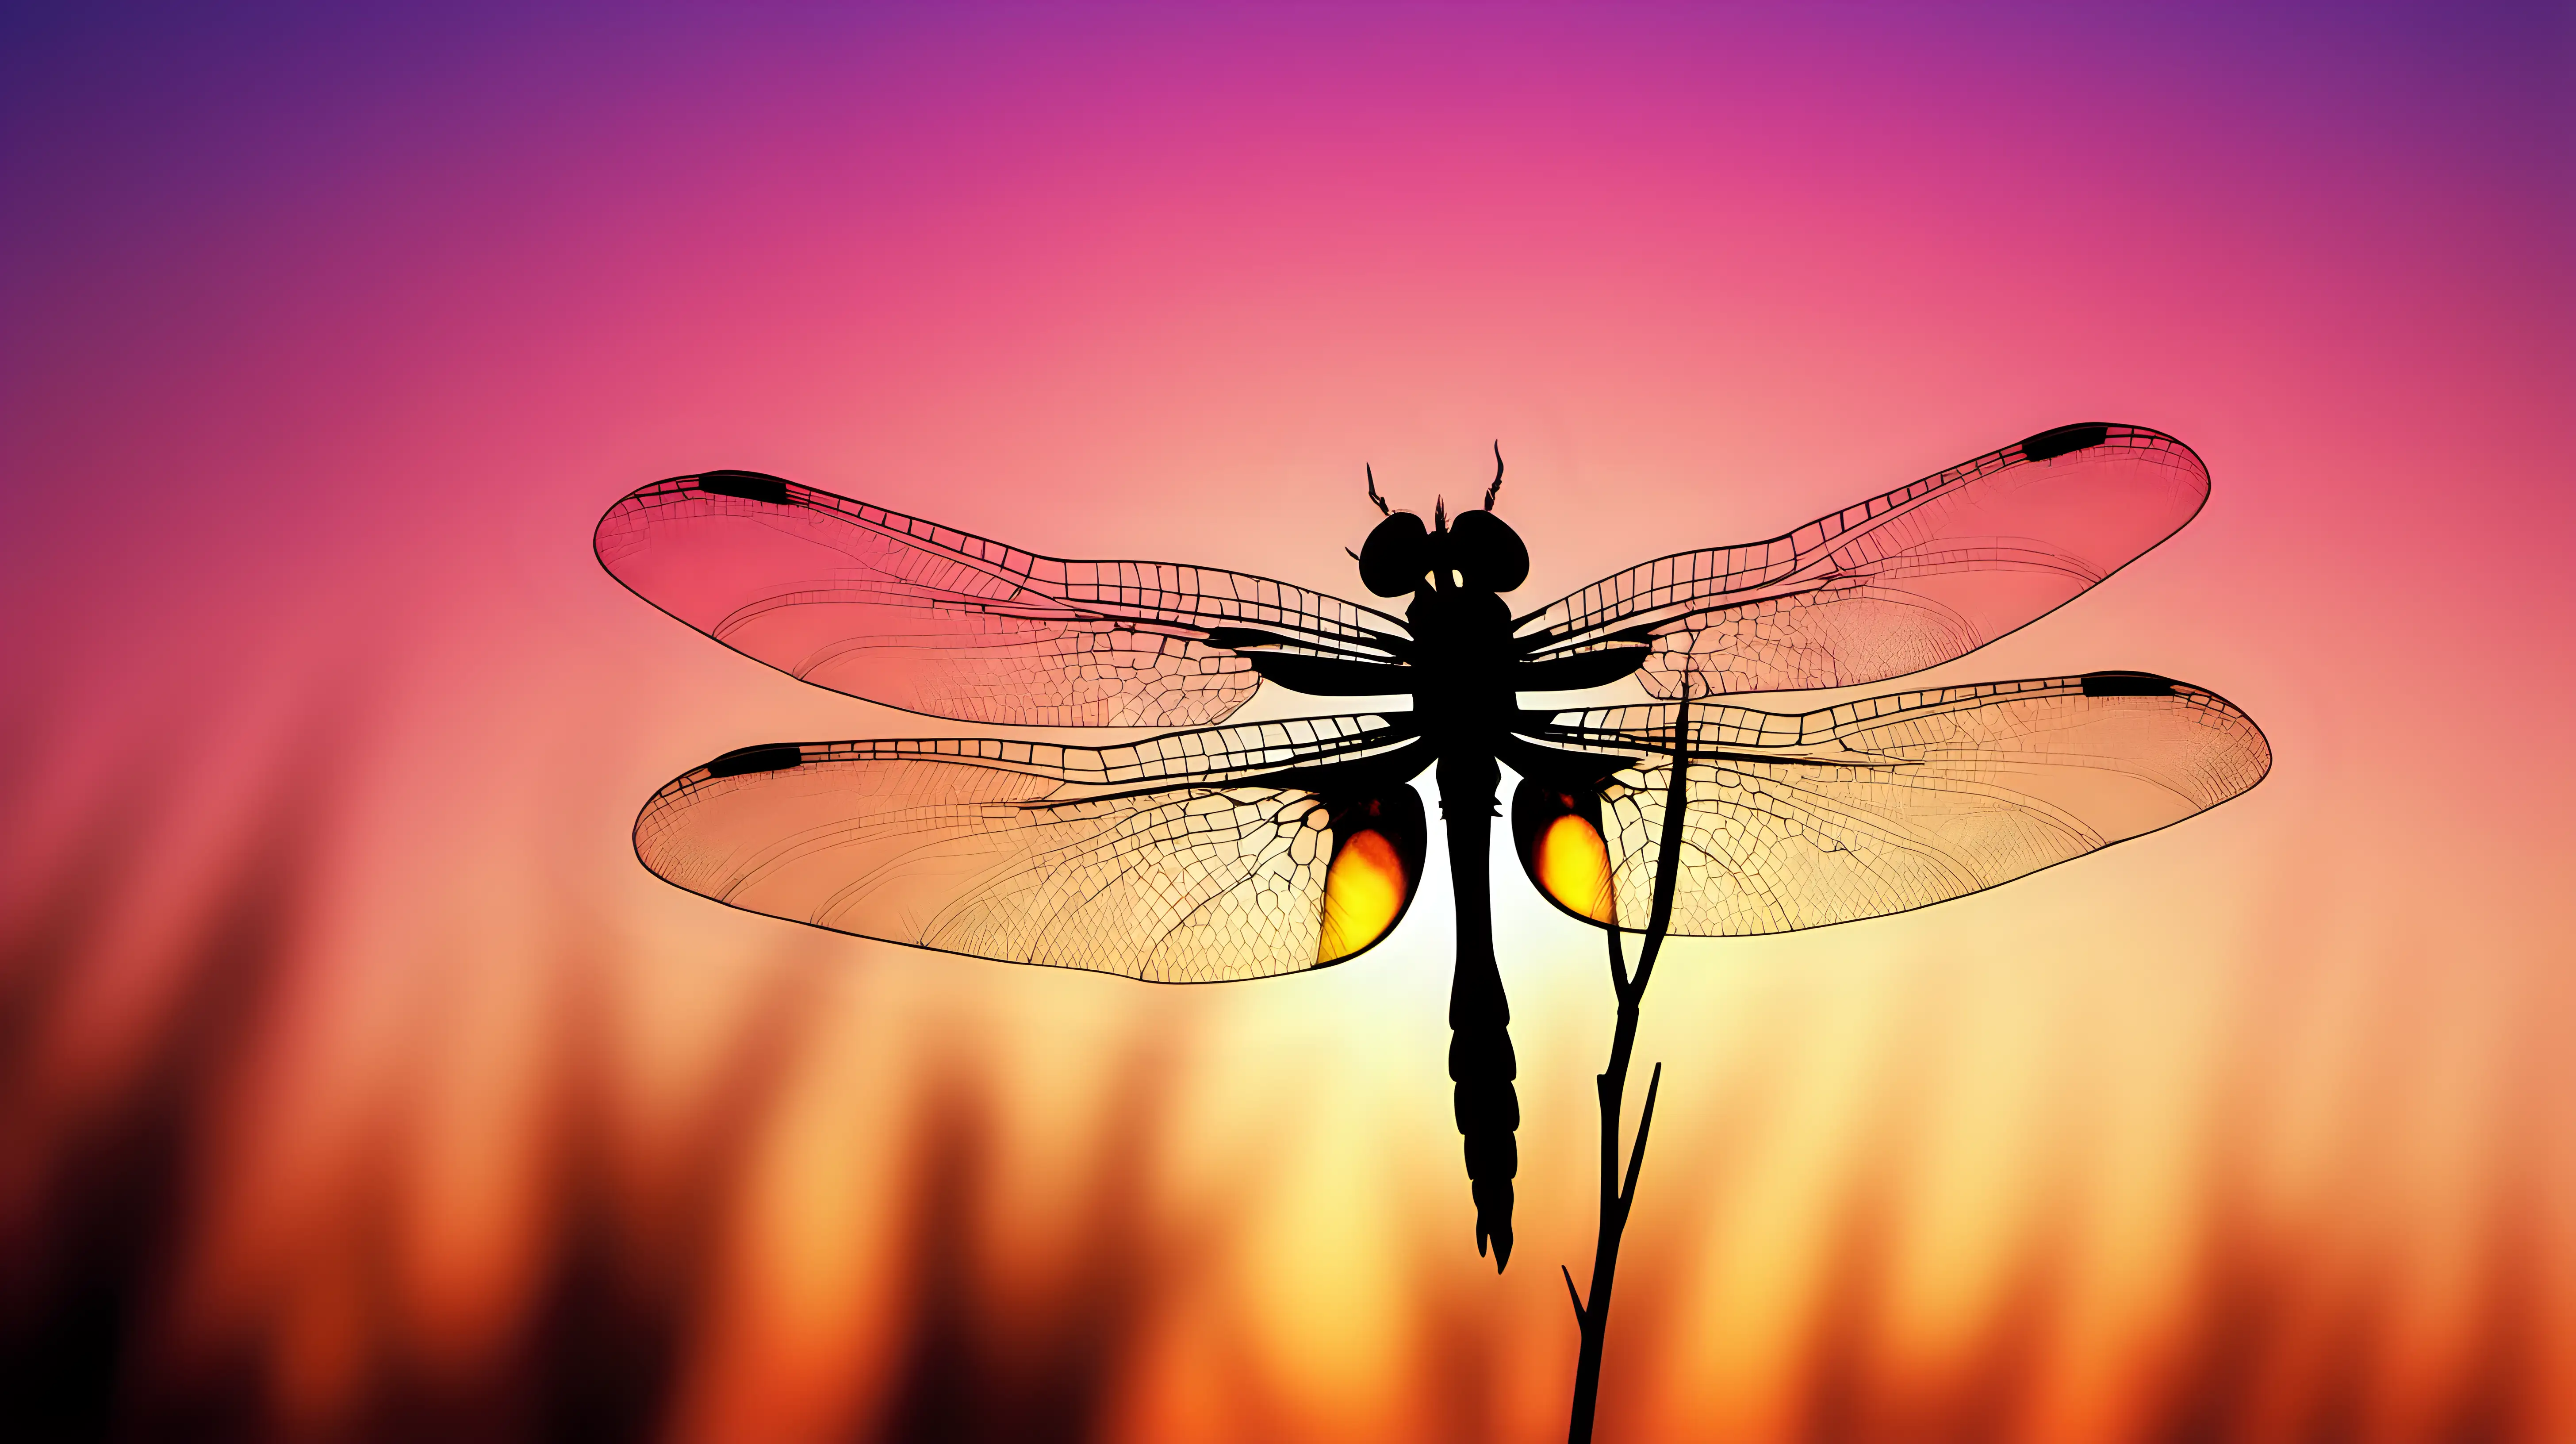 A silhouette of a dragonfly against the backdrop of a colorful sunset, creating a serene and magical atmosphere.